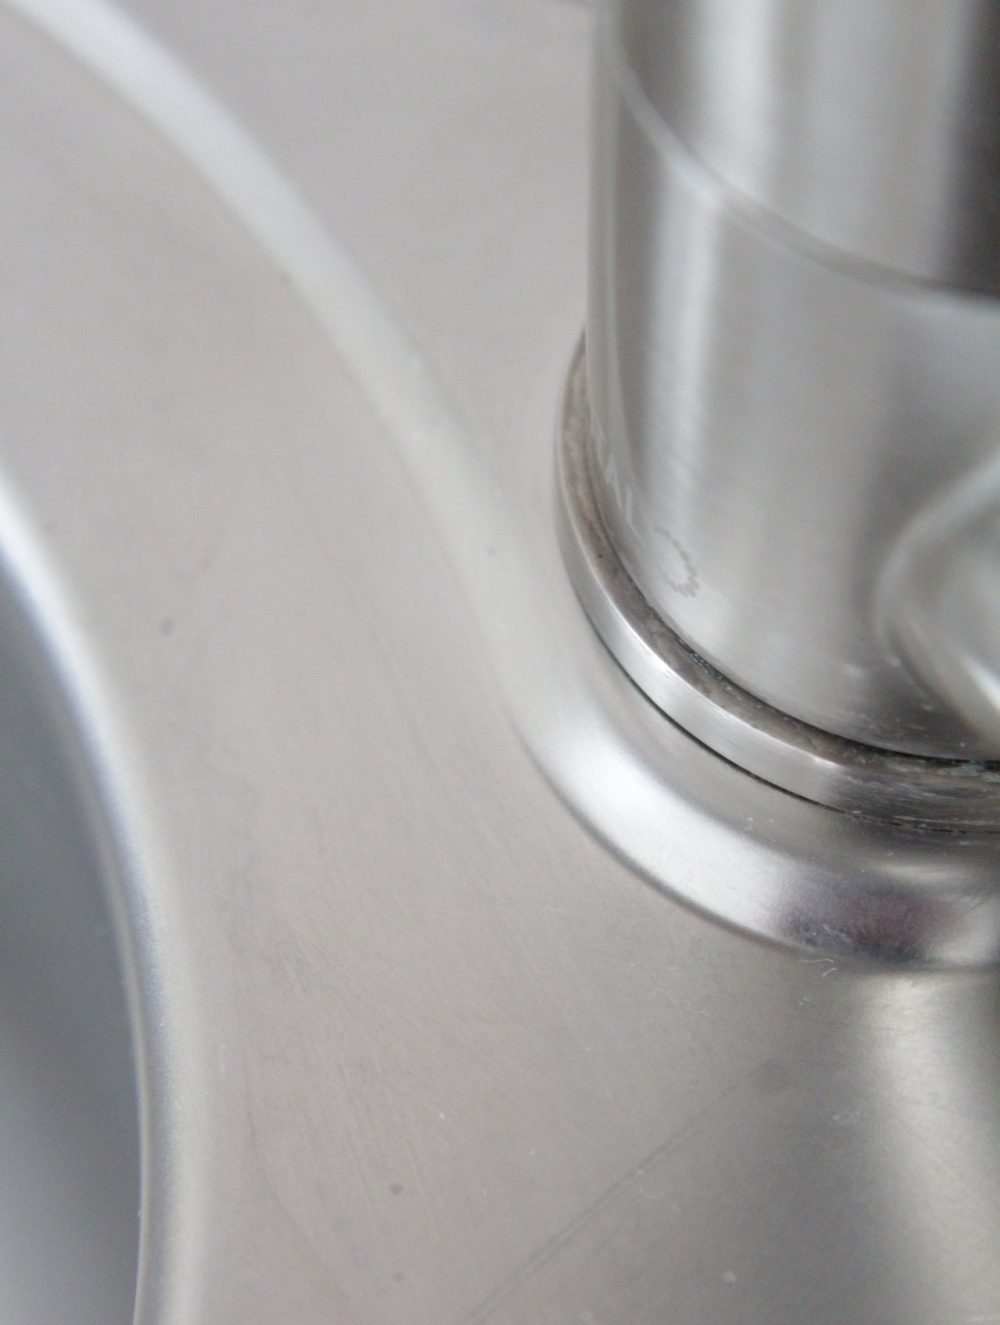 Best cleaner for stainless steel sink